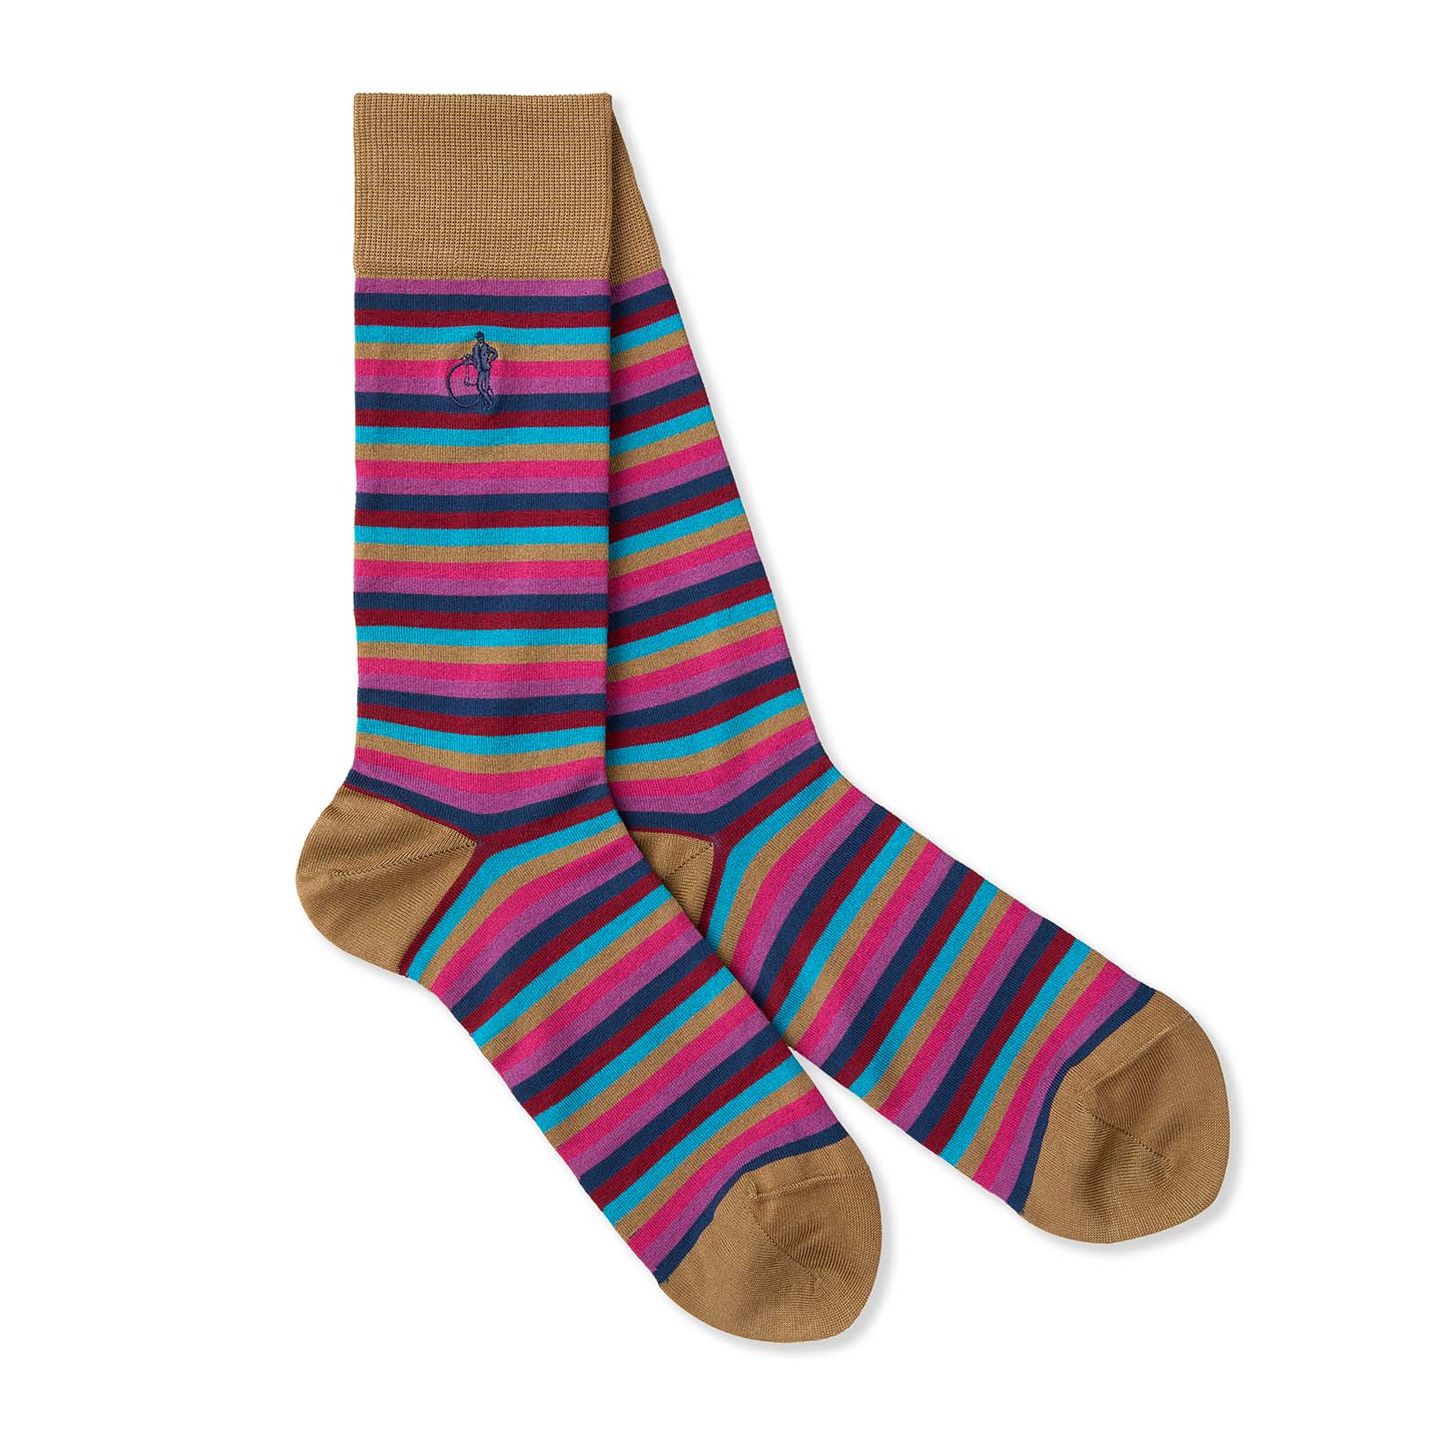 Stripped socks with pinks, blues and red strips and the heel, toe and cuffs in a camel colour